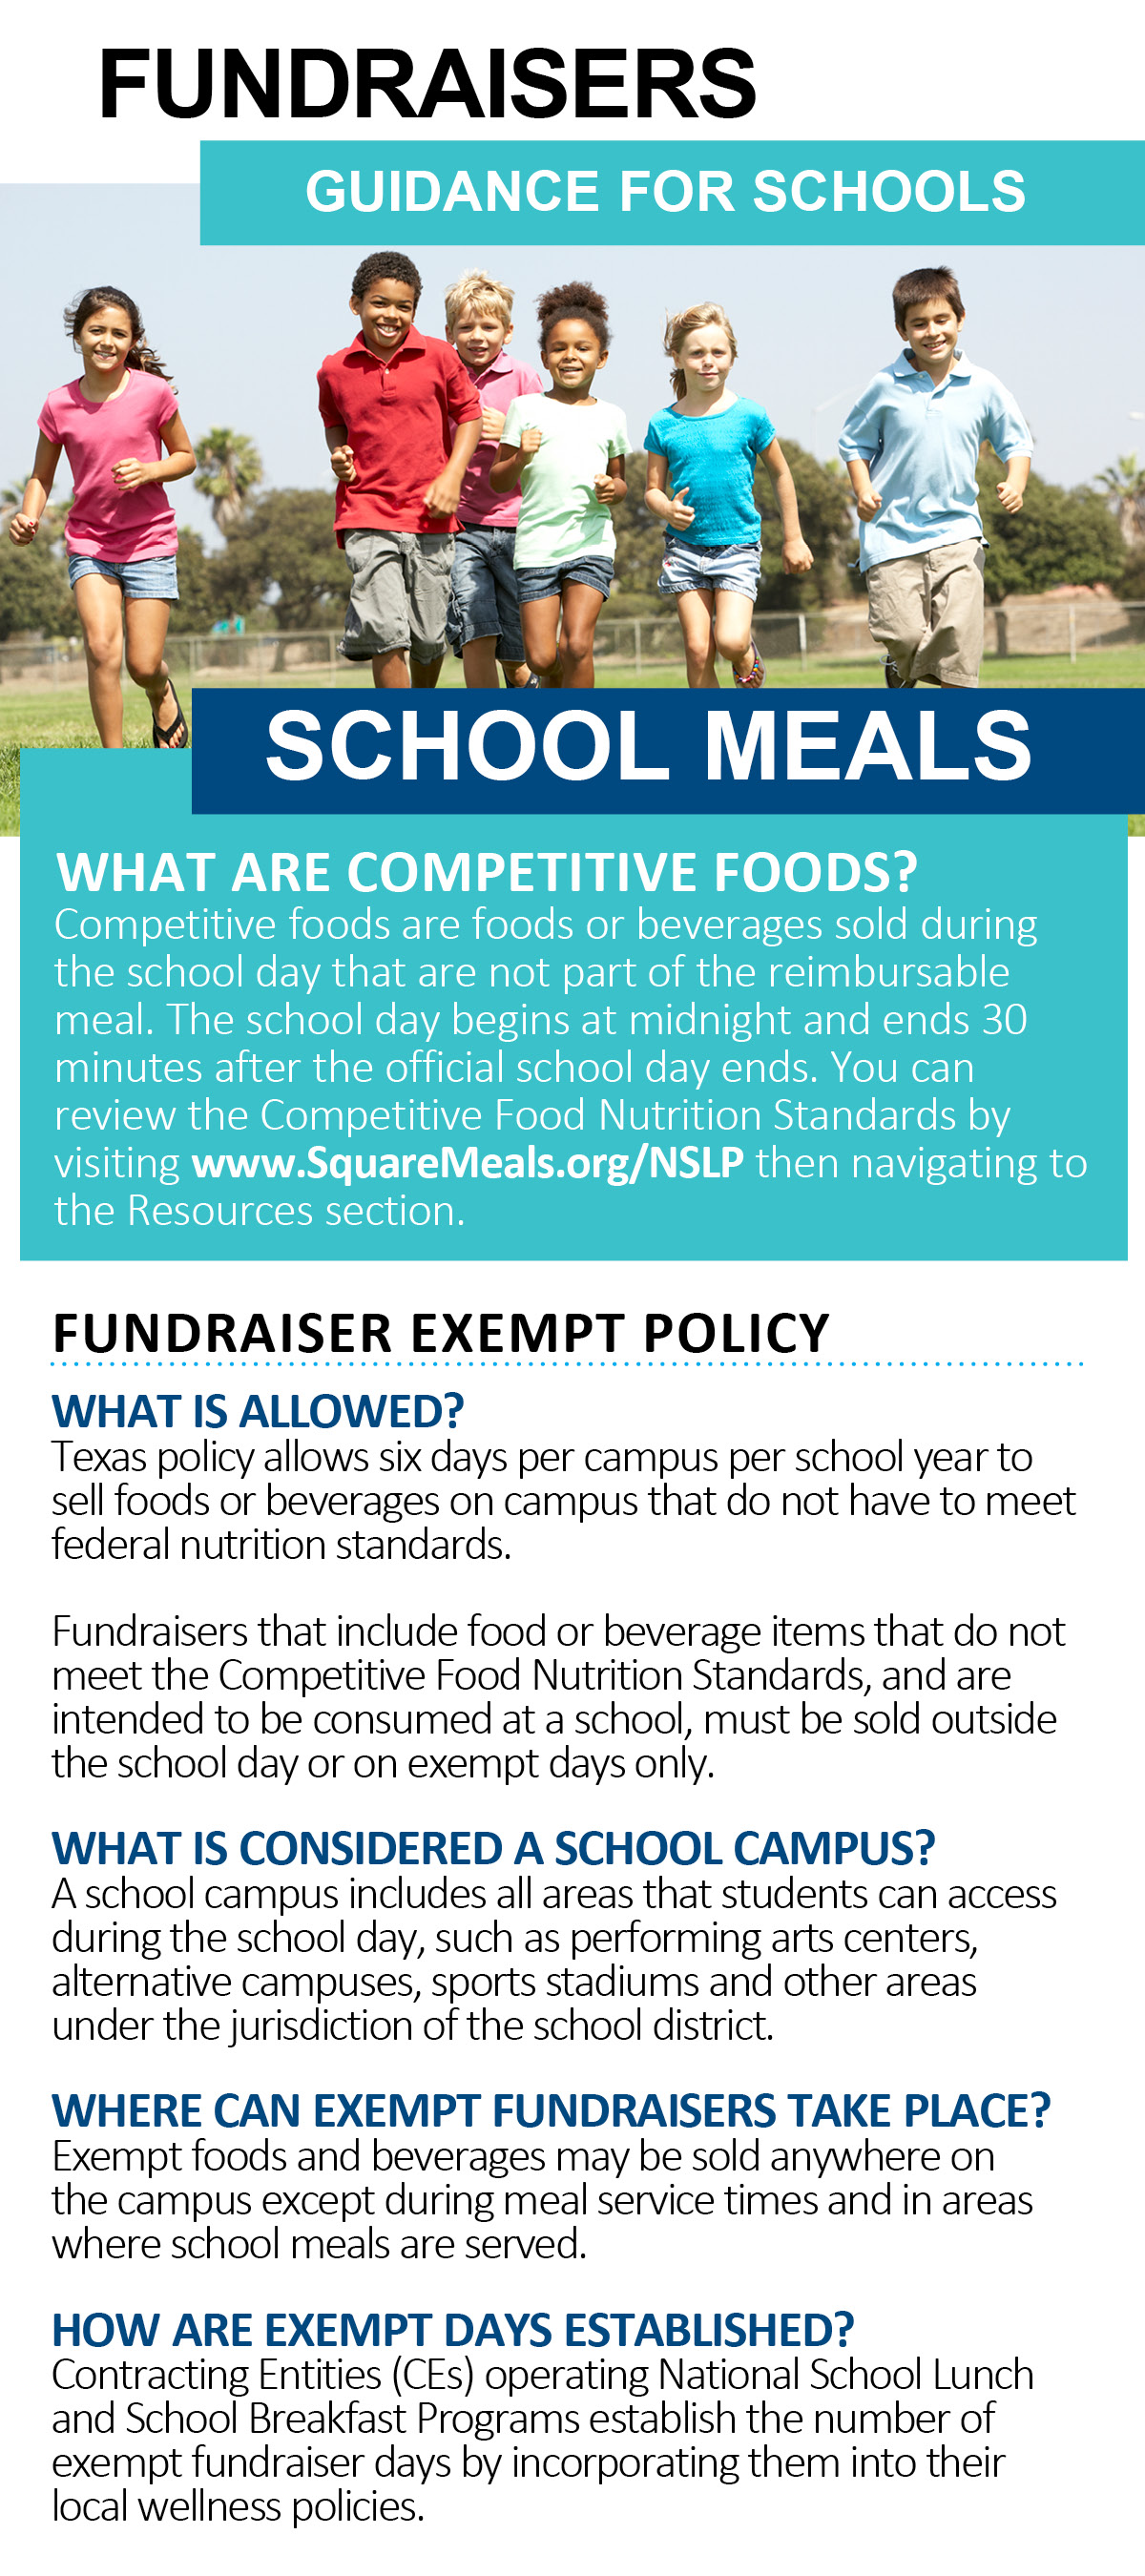 Fundraising Guidance for Schools